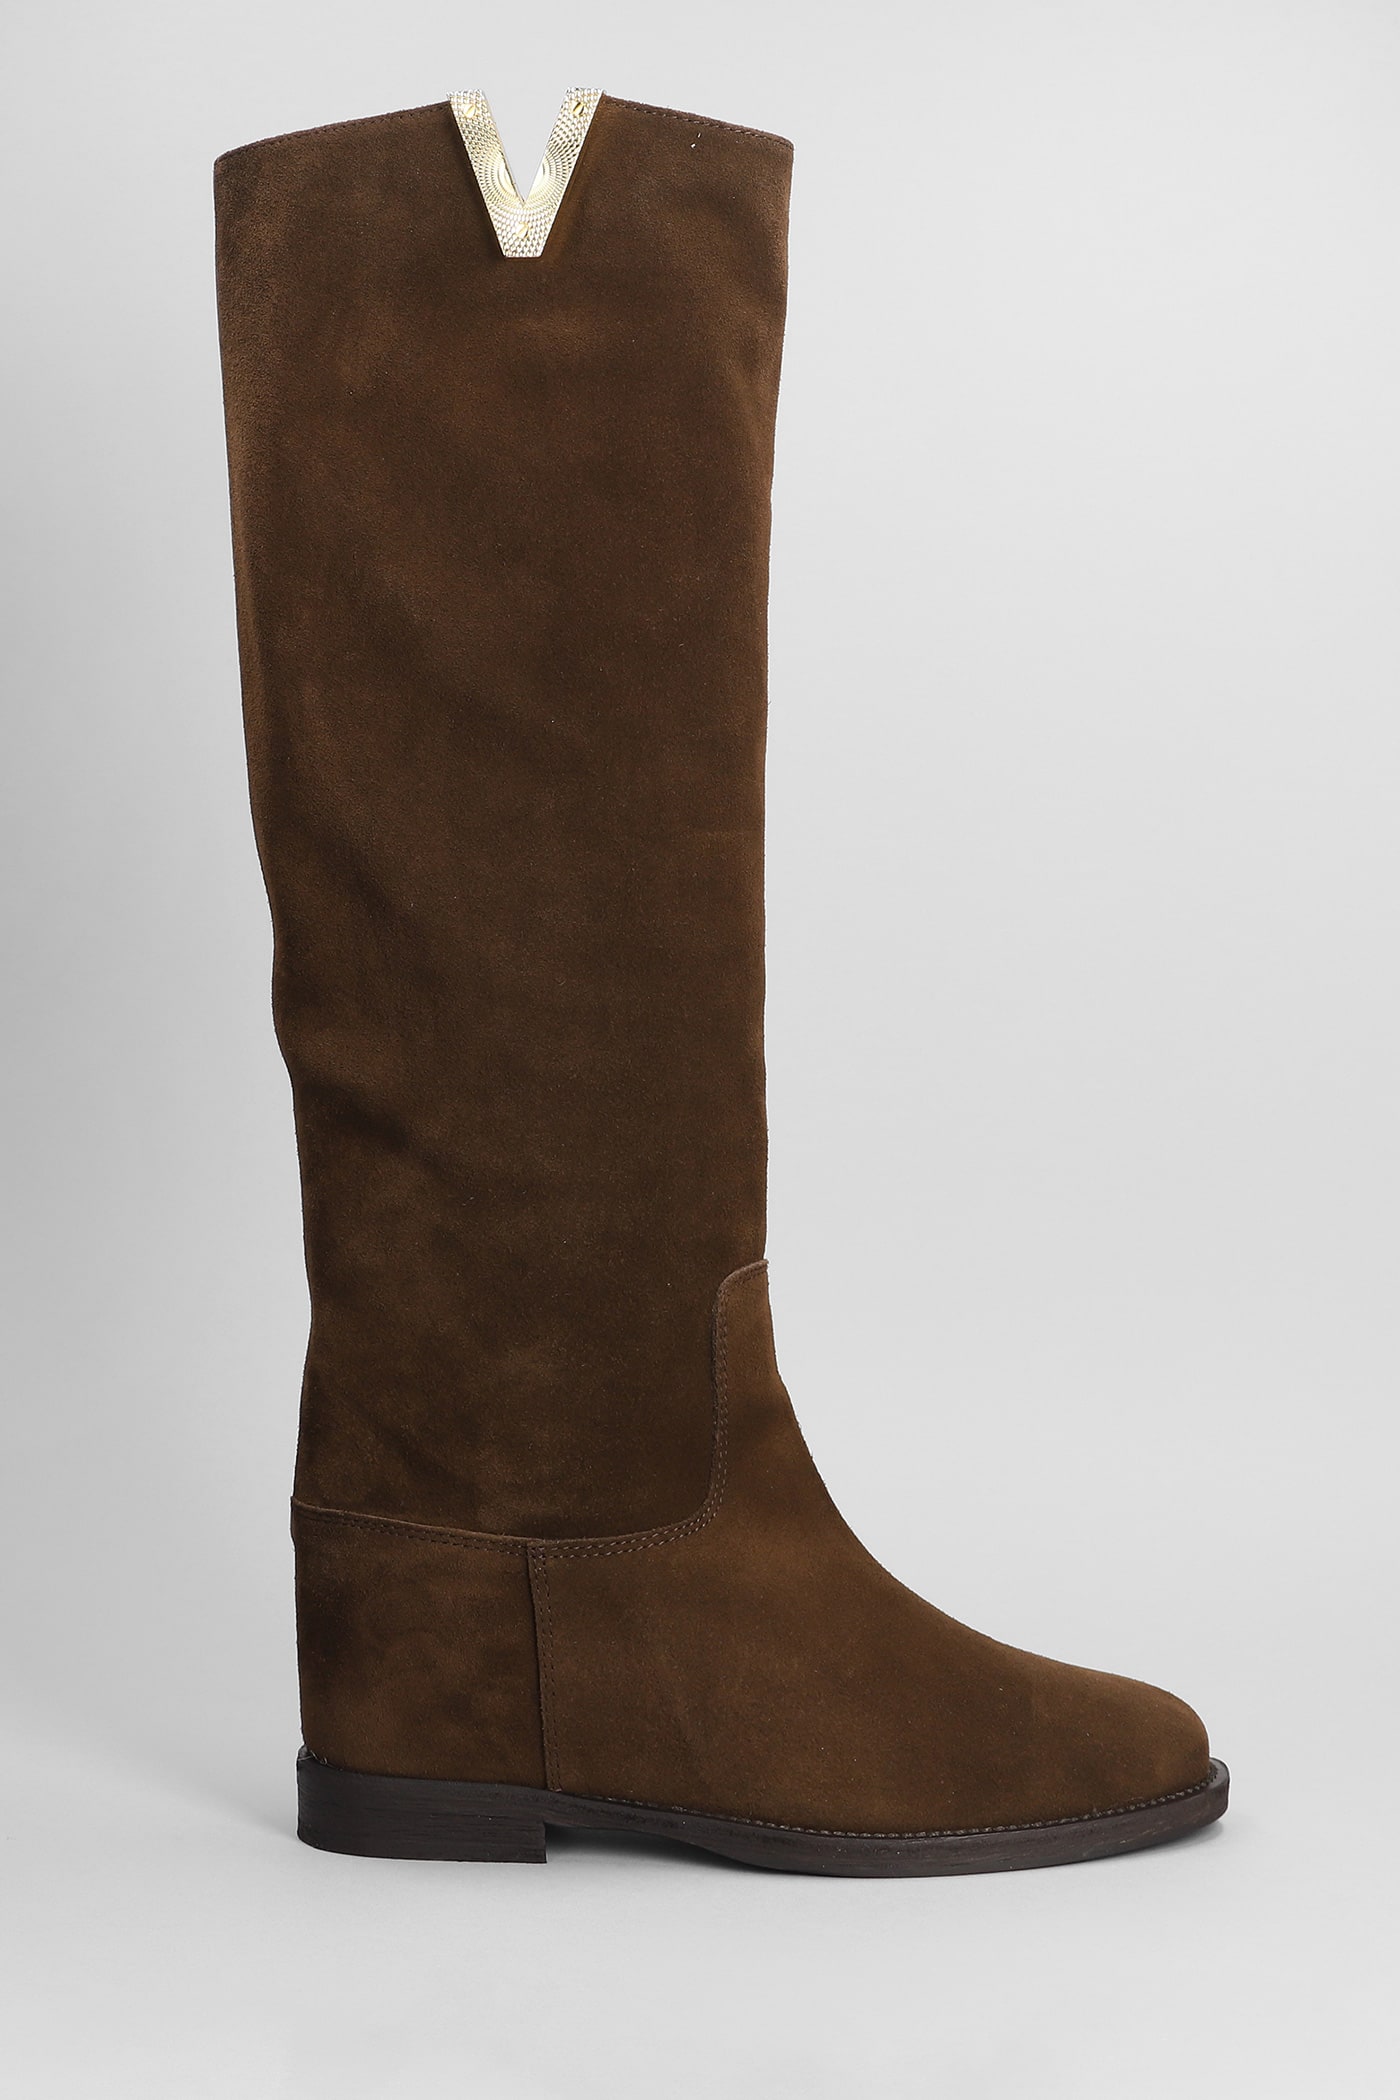 In Brown Suede